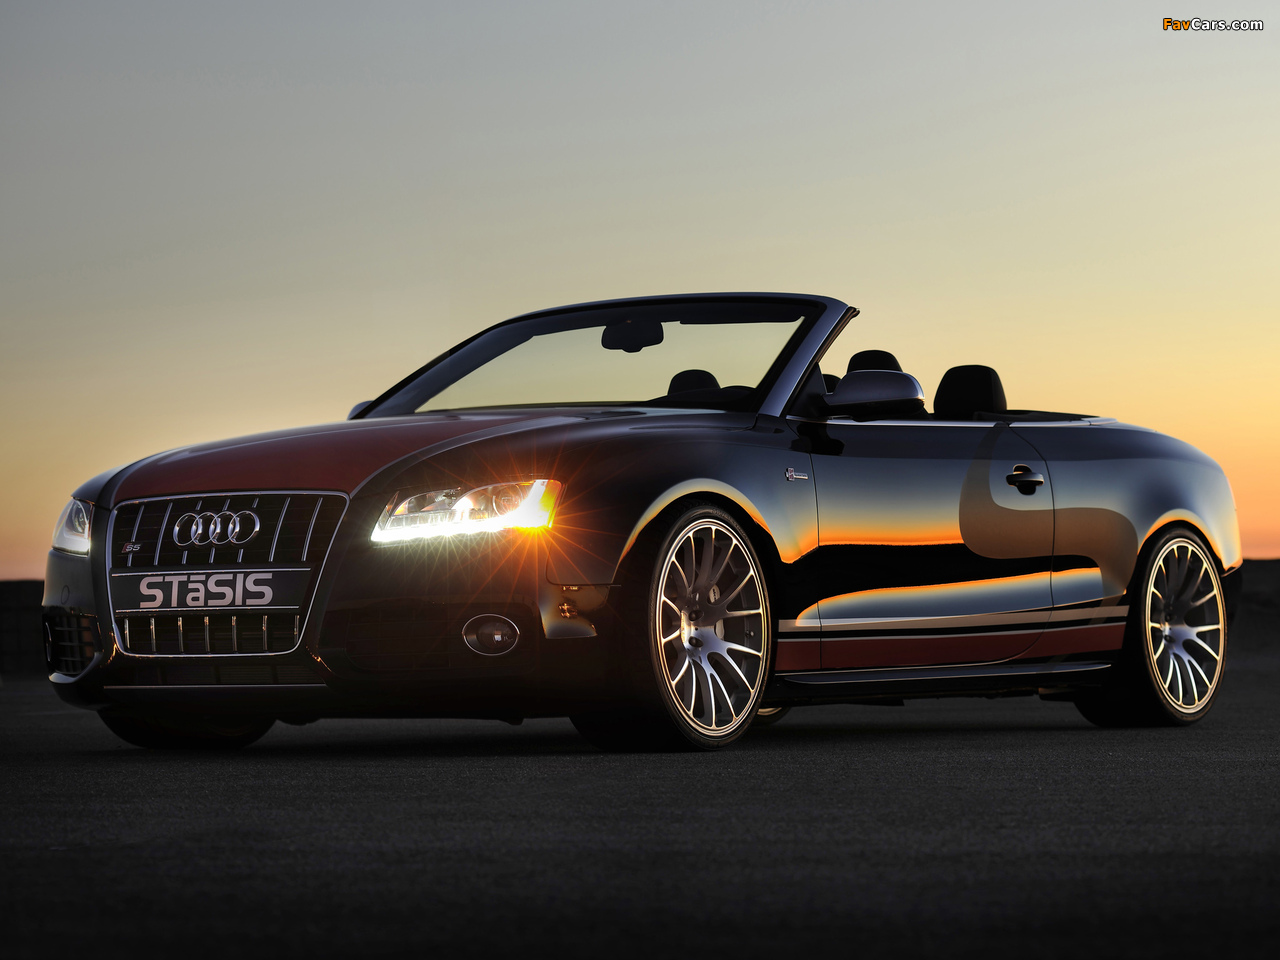 STaSIS Engineering Audi S5 Cabriolet Challenge Edition 2011 photos (1280 x 960)